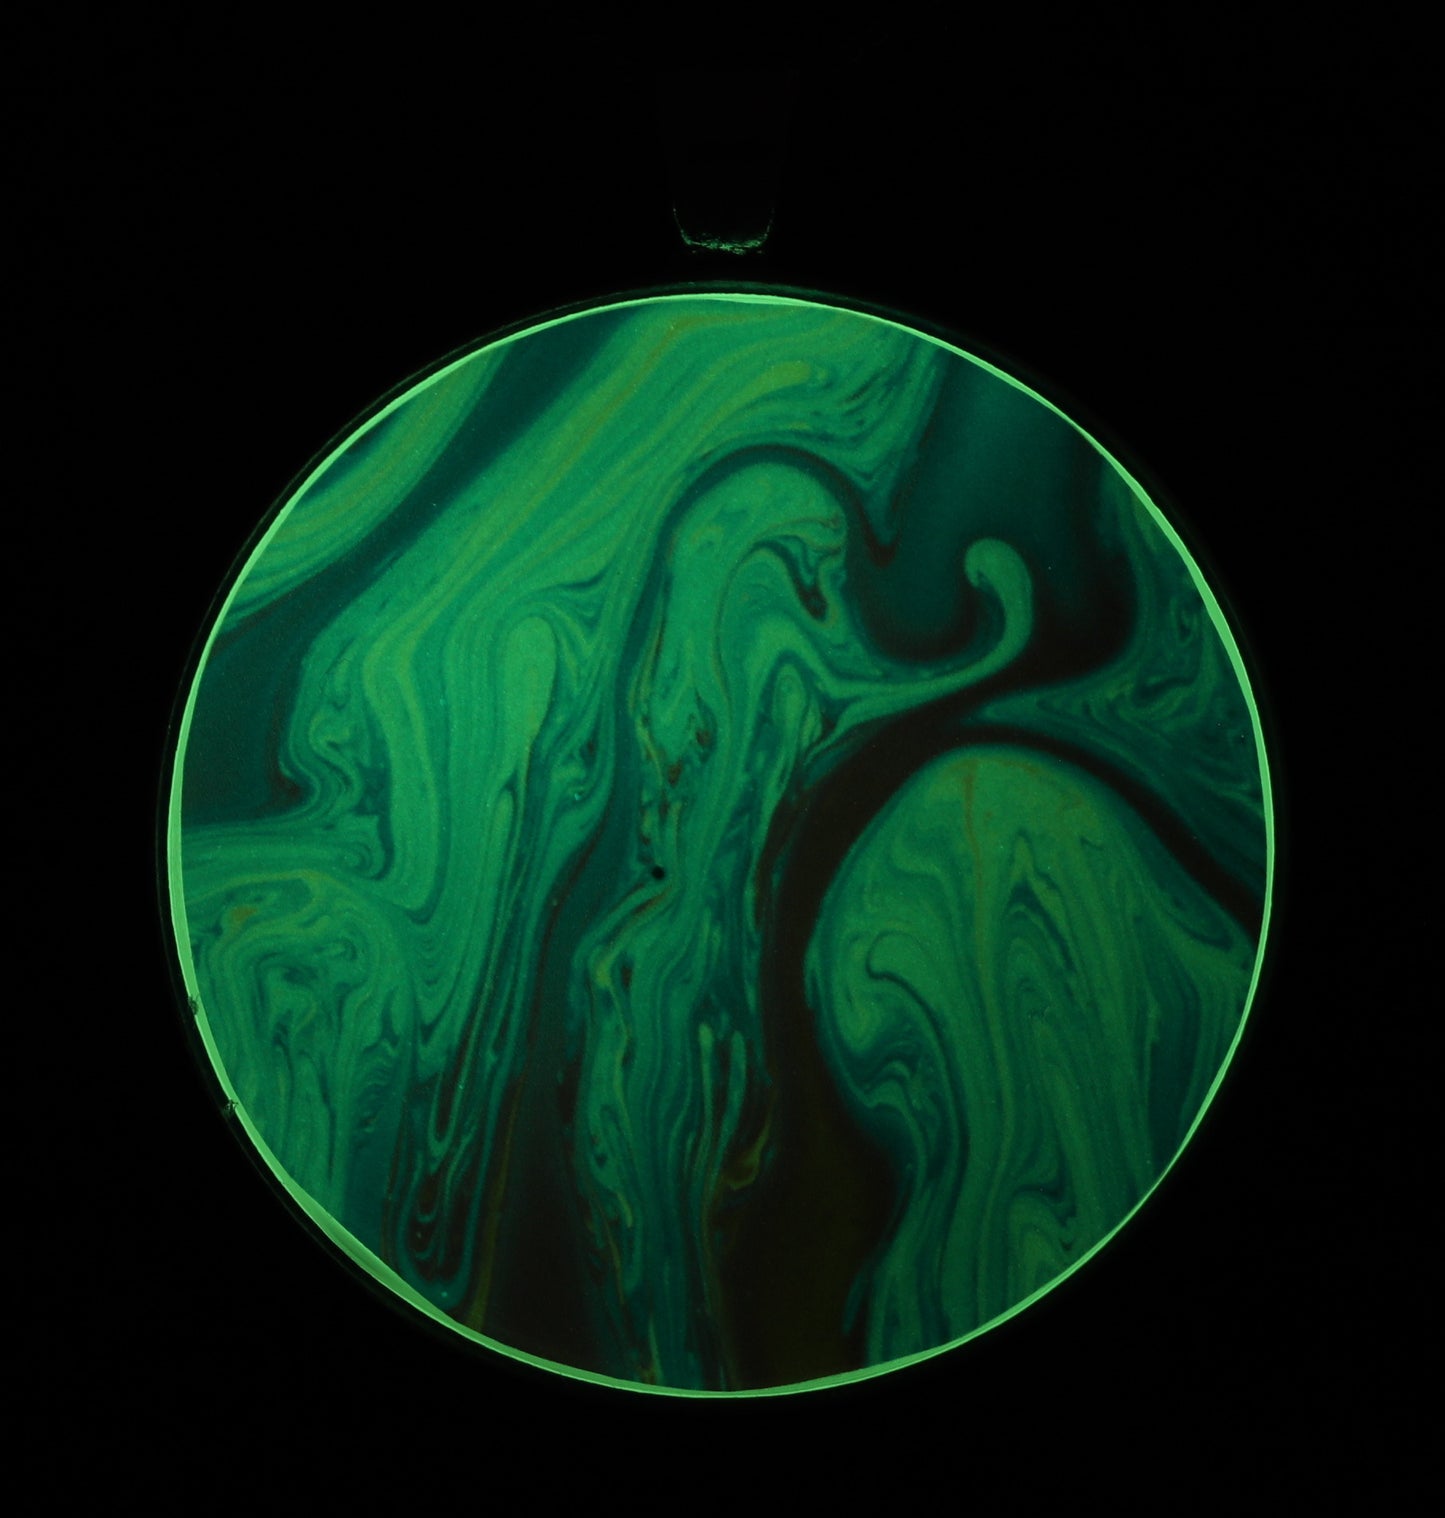 Blue Rage  - Glow-in-the-dark pendant with a beautiful abstract soap film pattern